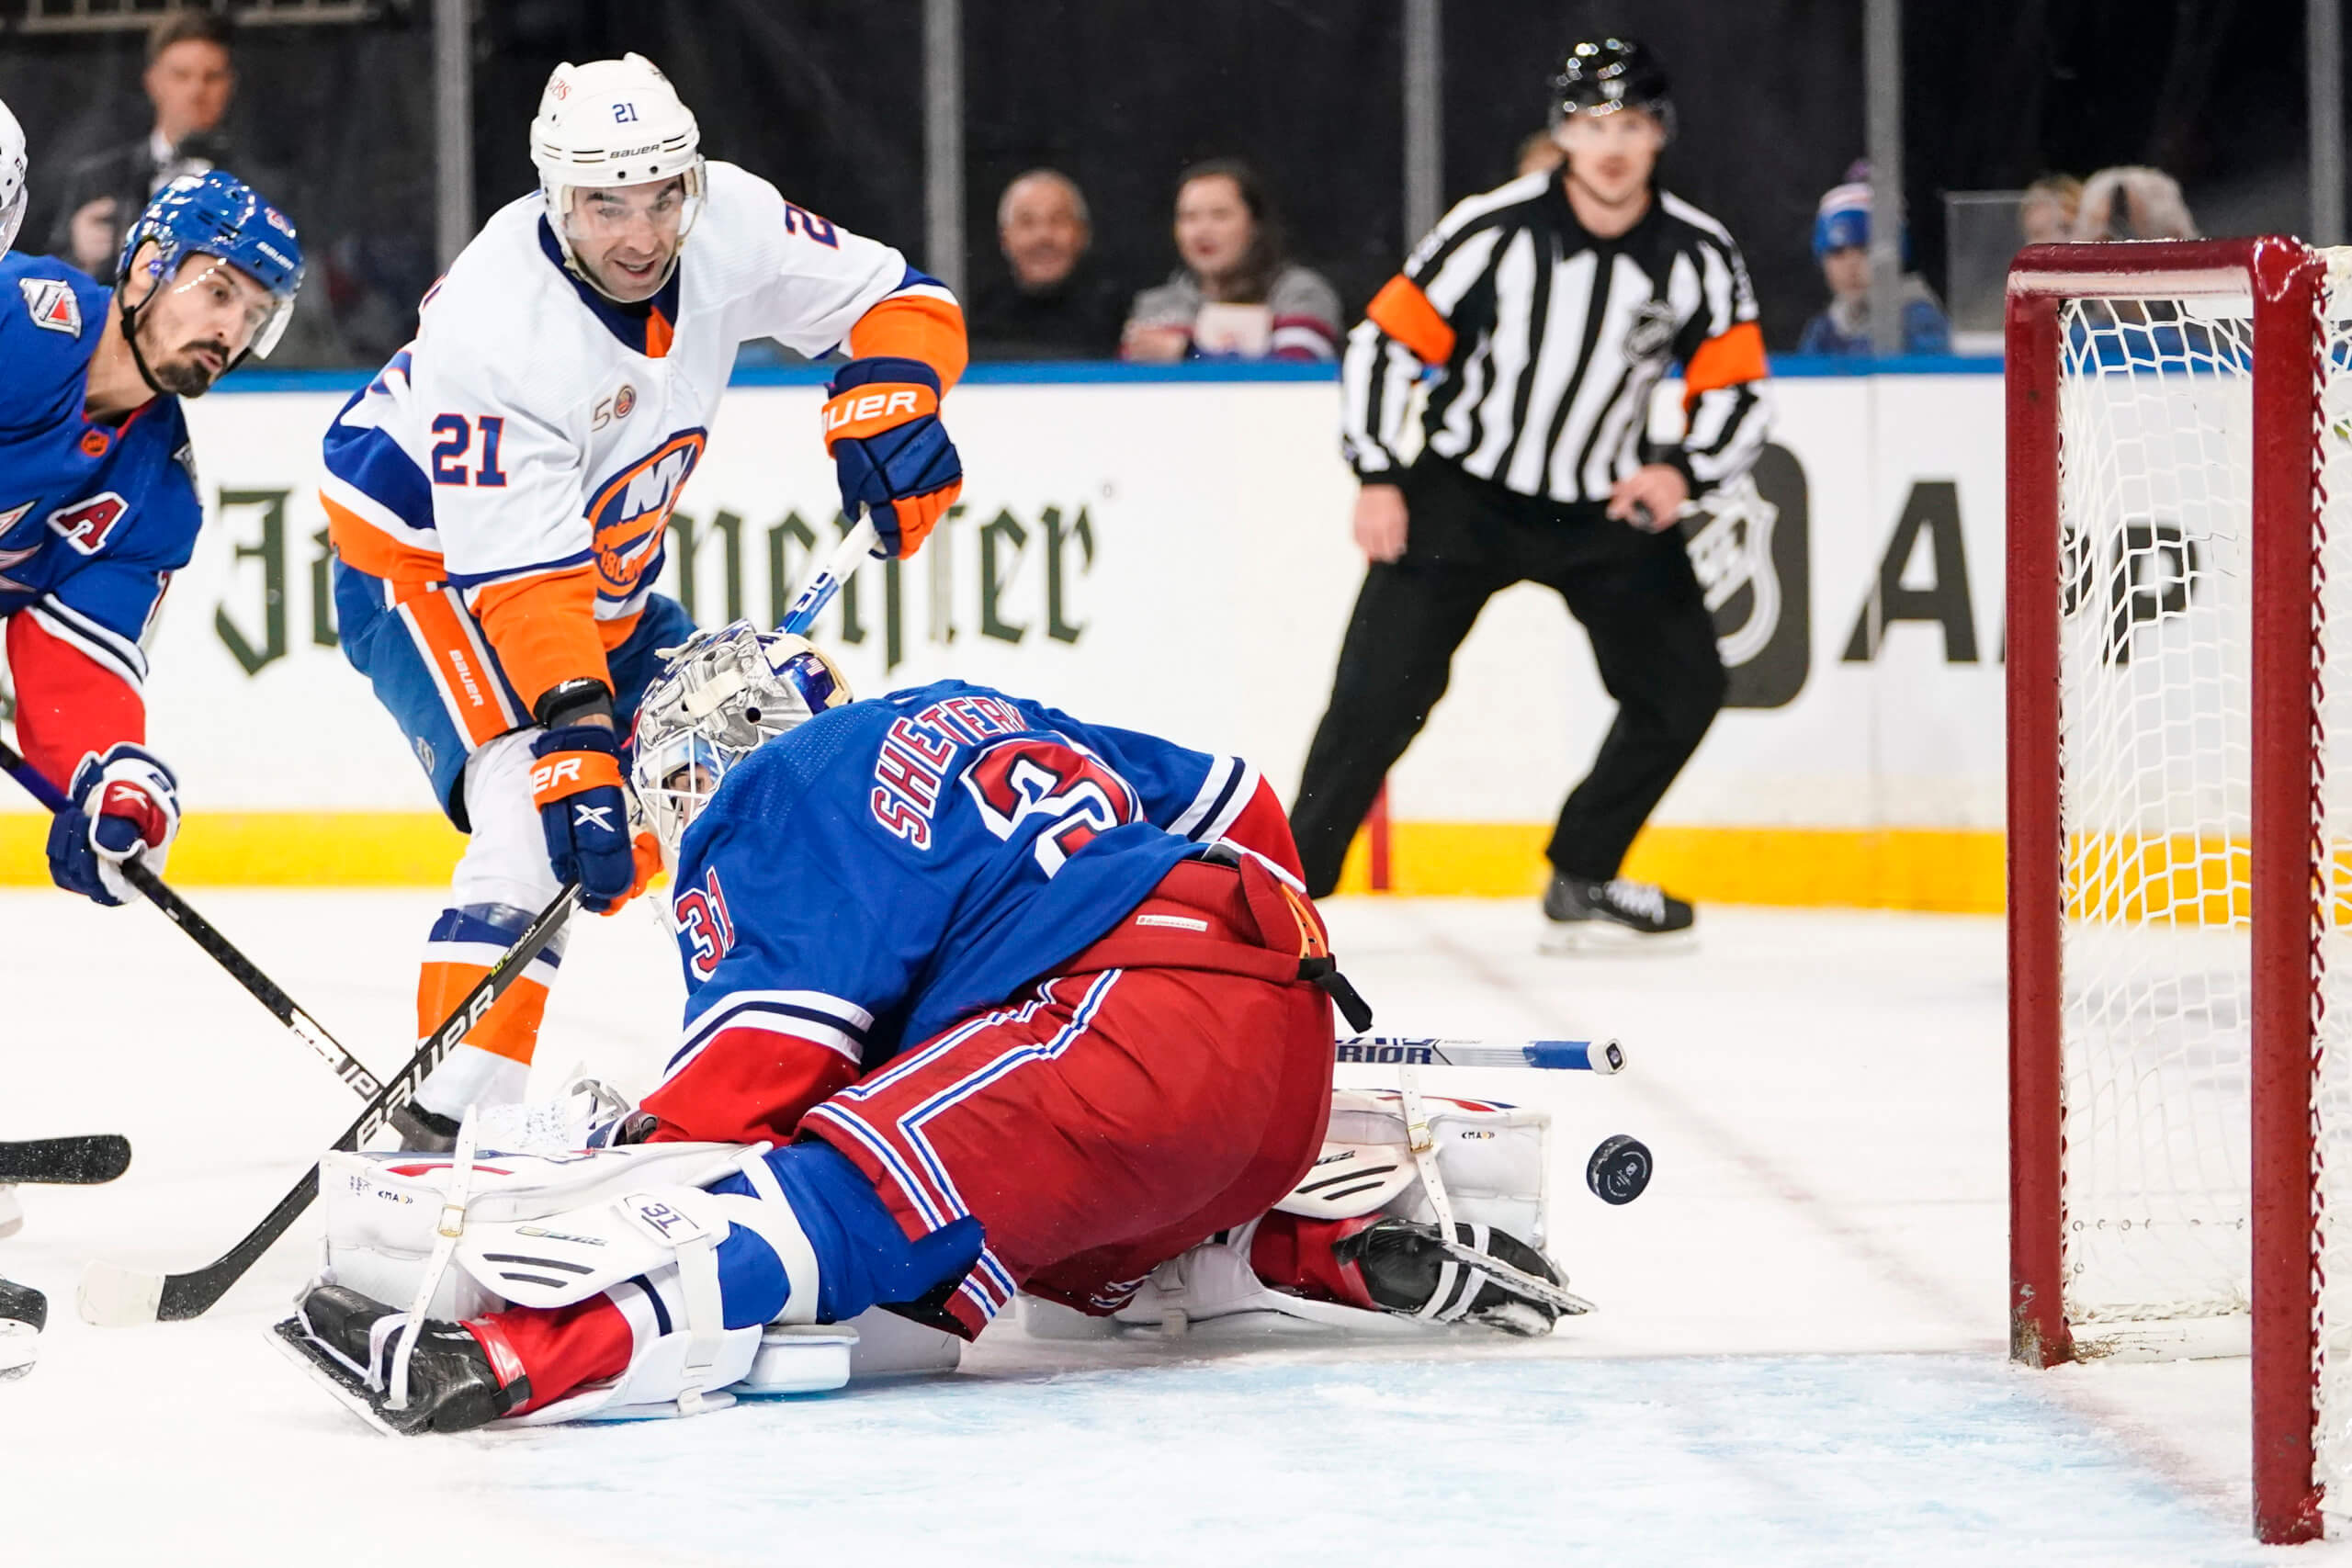 MetLife Stadium to host two outdoor games with Rangers, Isles